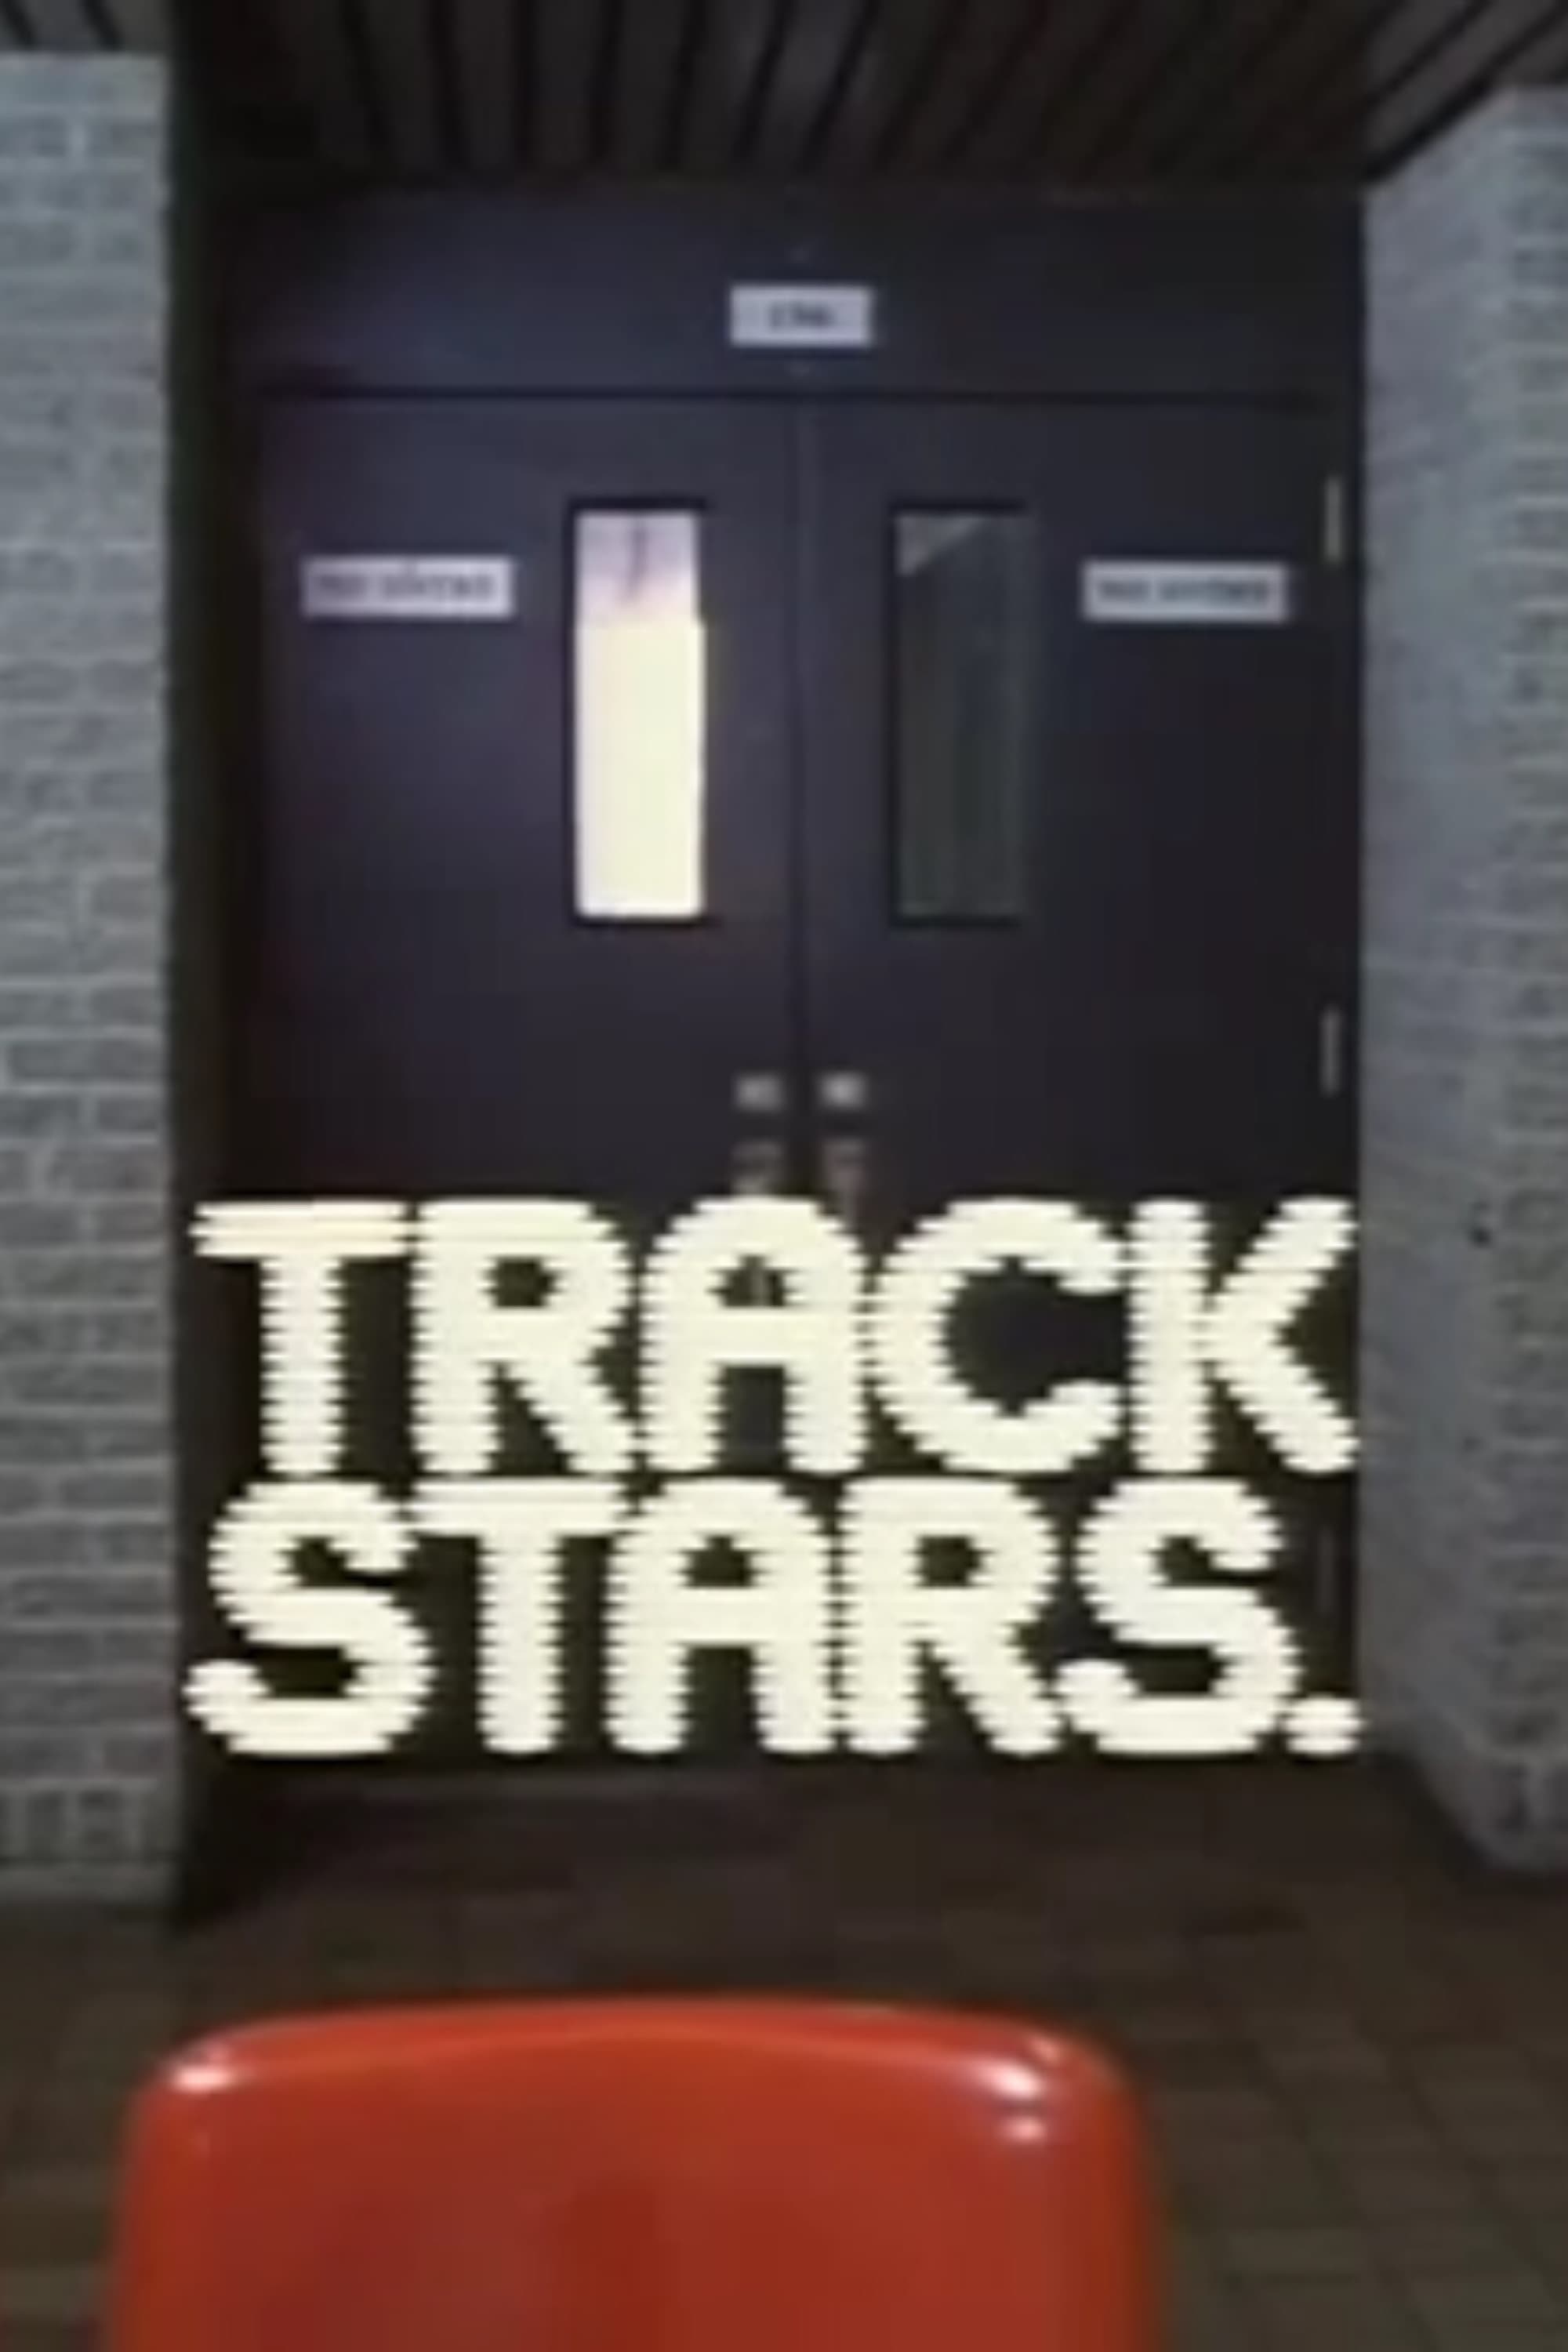 Track Stars.: The Unseen Heroes of Movie Sound